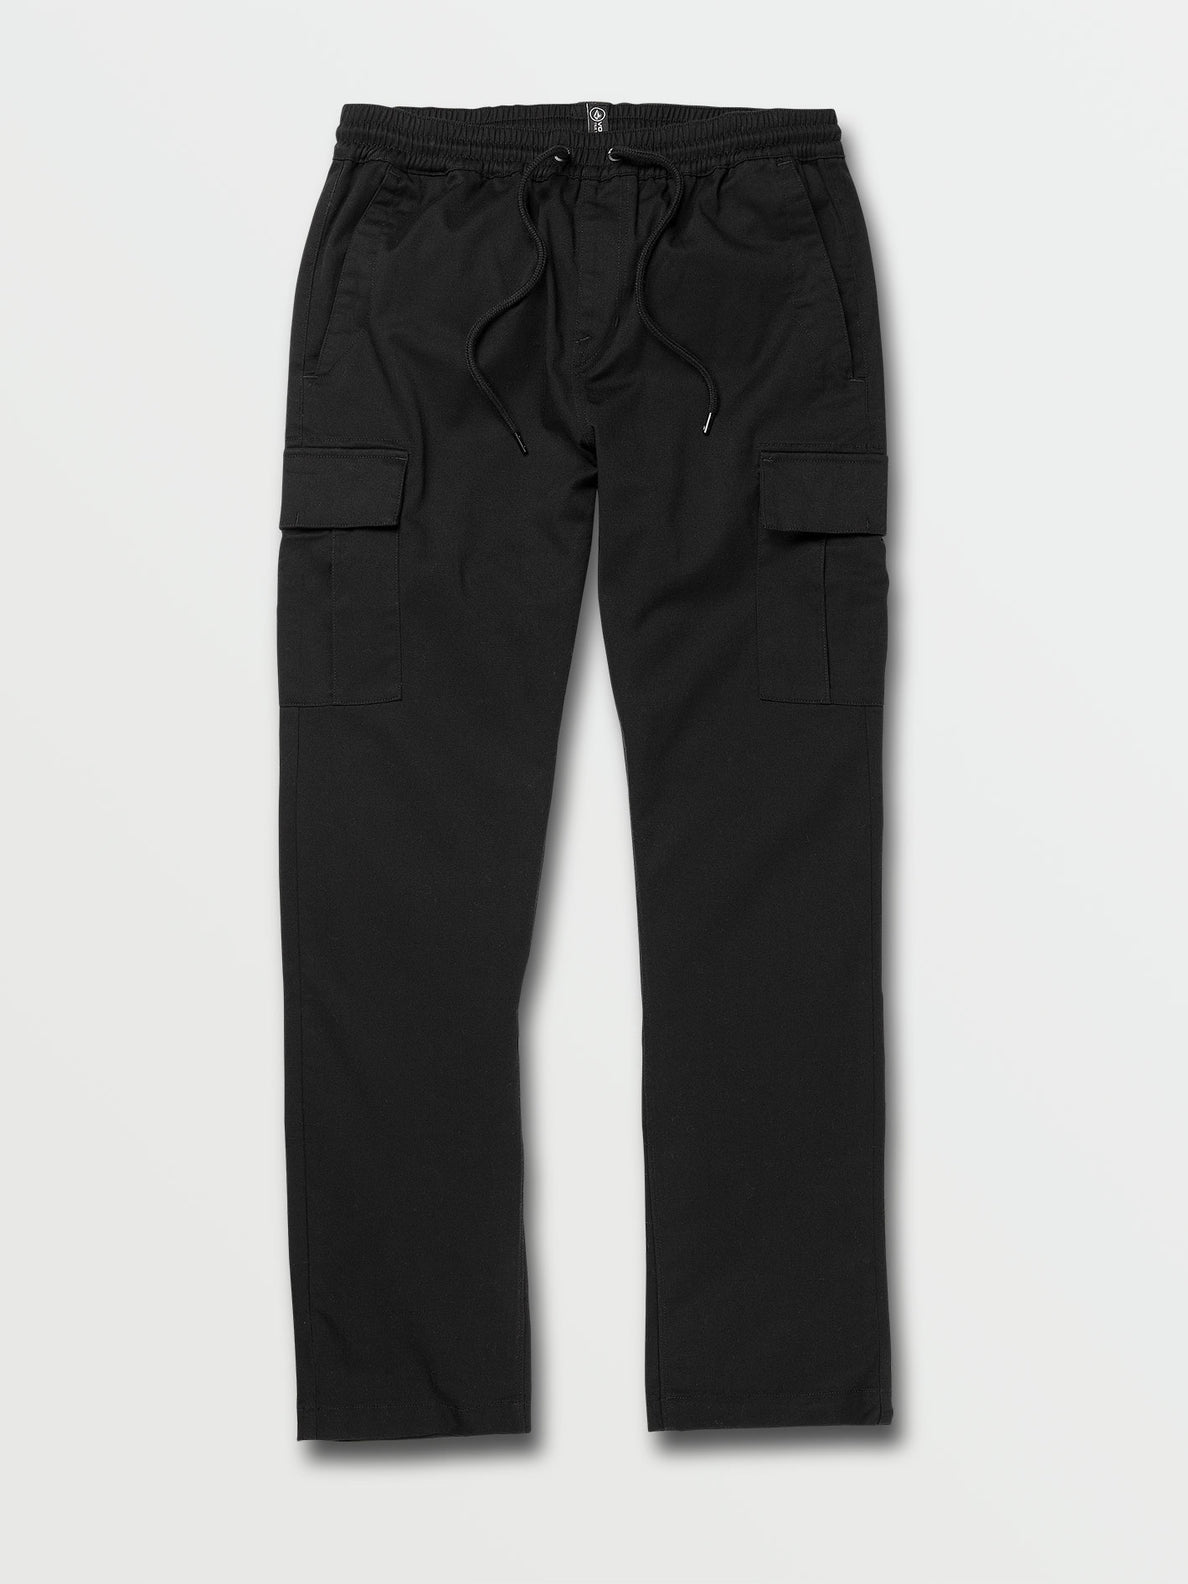 MARCH CASUAL PANT - BLACK (A1232130_BLK) [F]